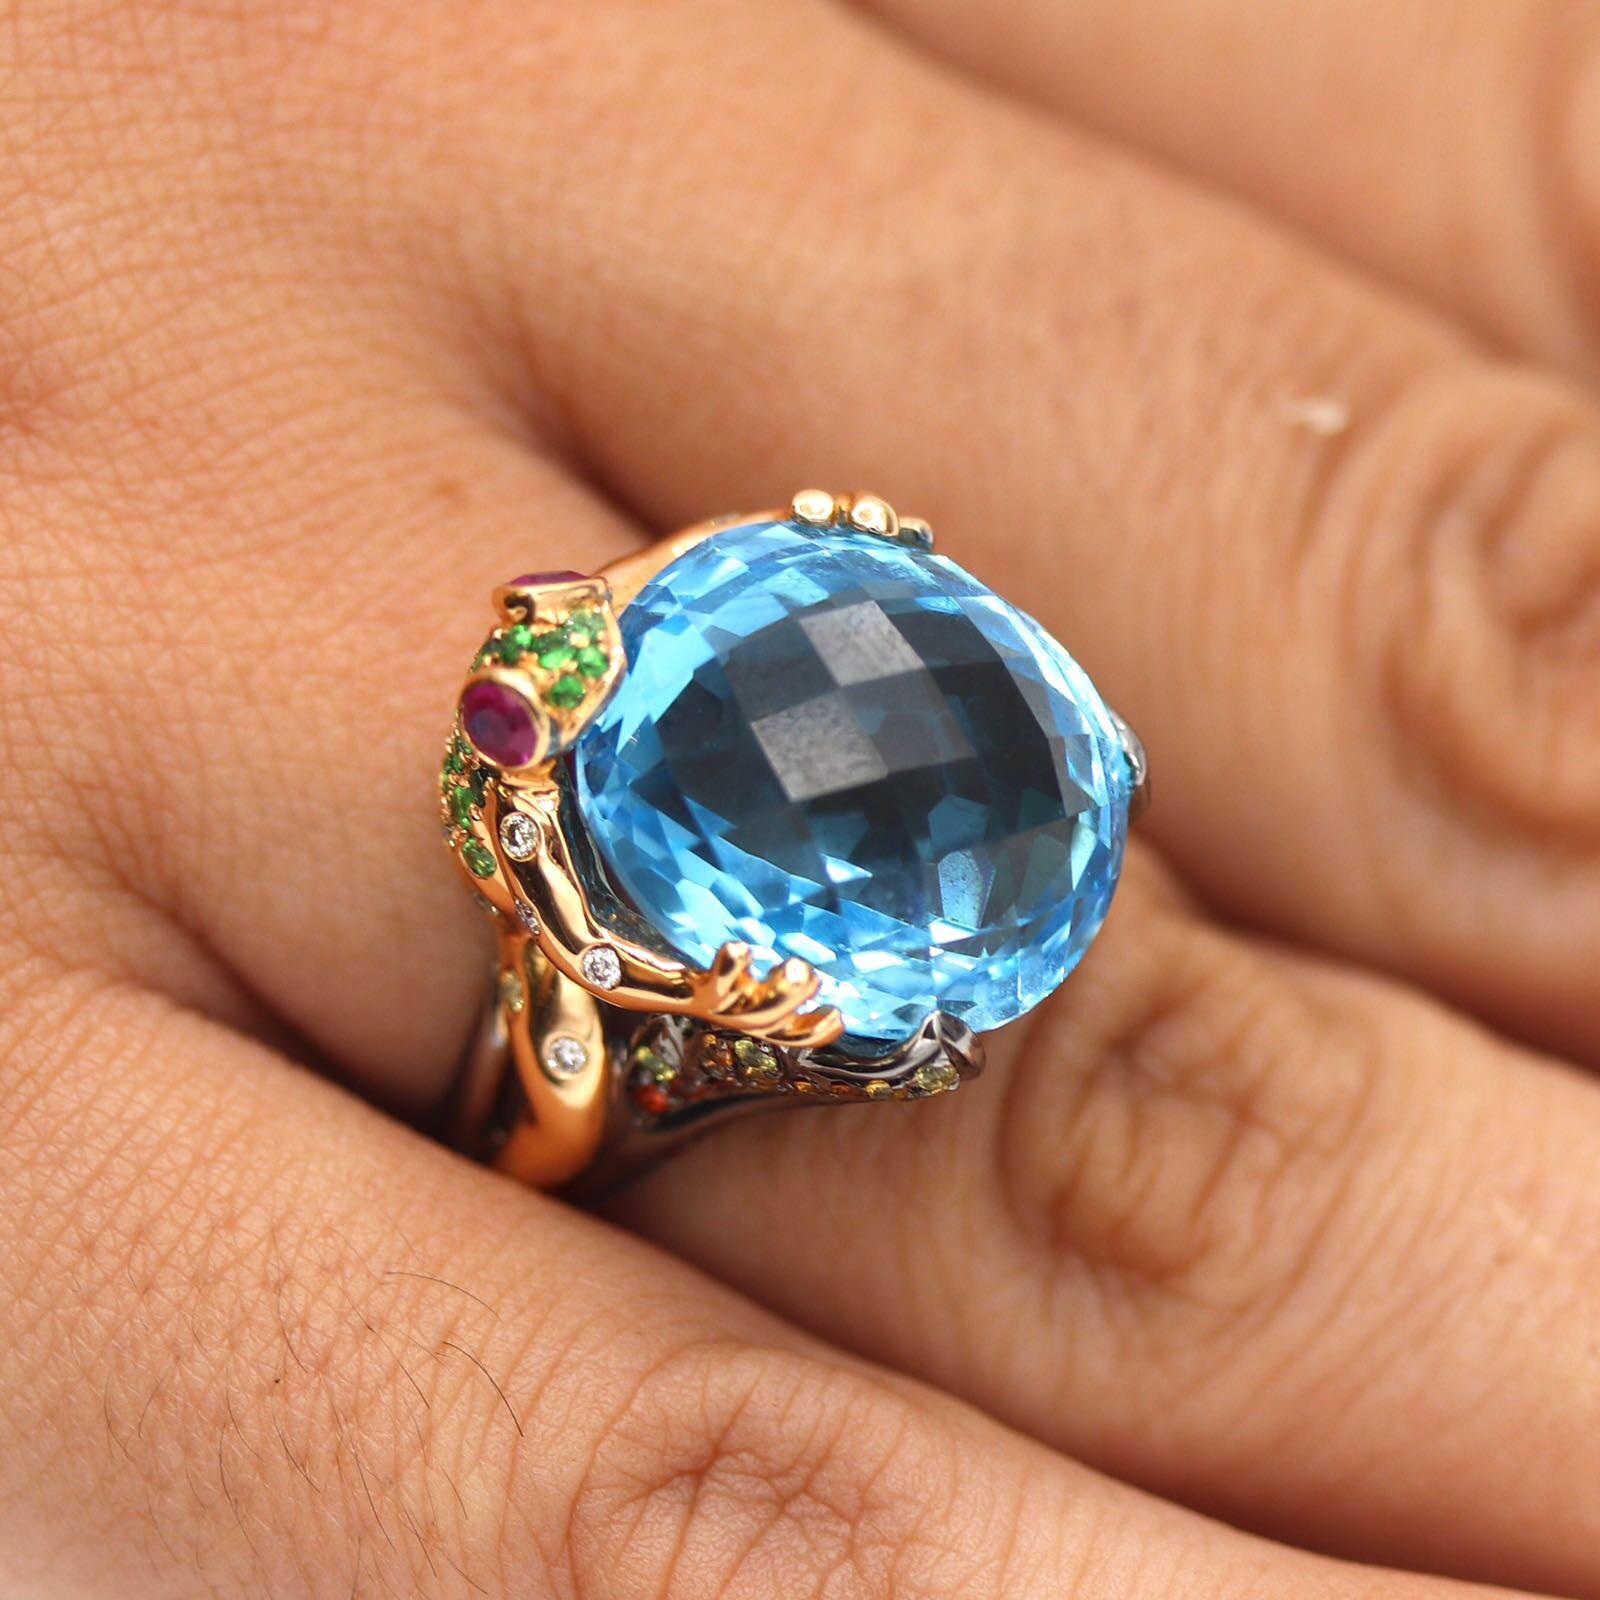 Women's Gem Gallery Frog Ring with Blue Topaz Cocktail Ring For Sale